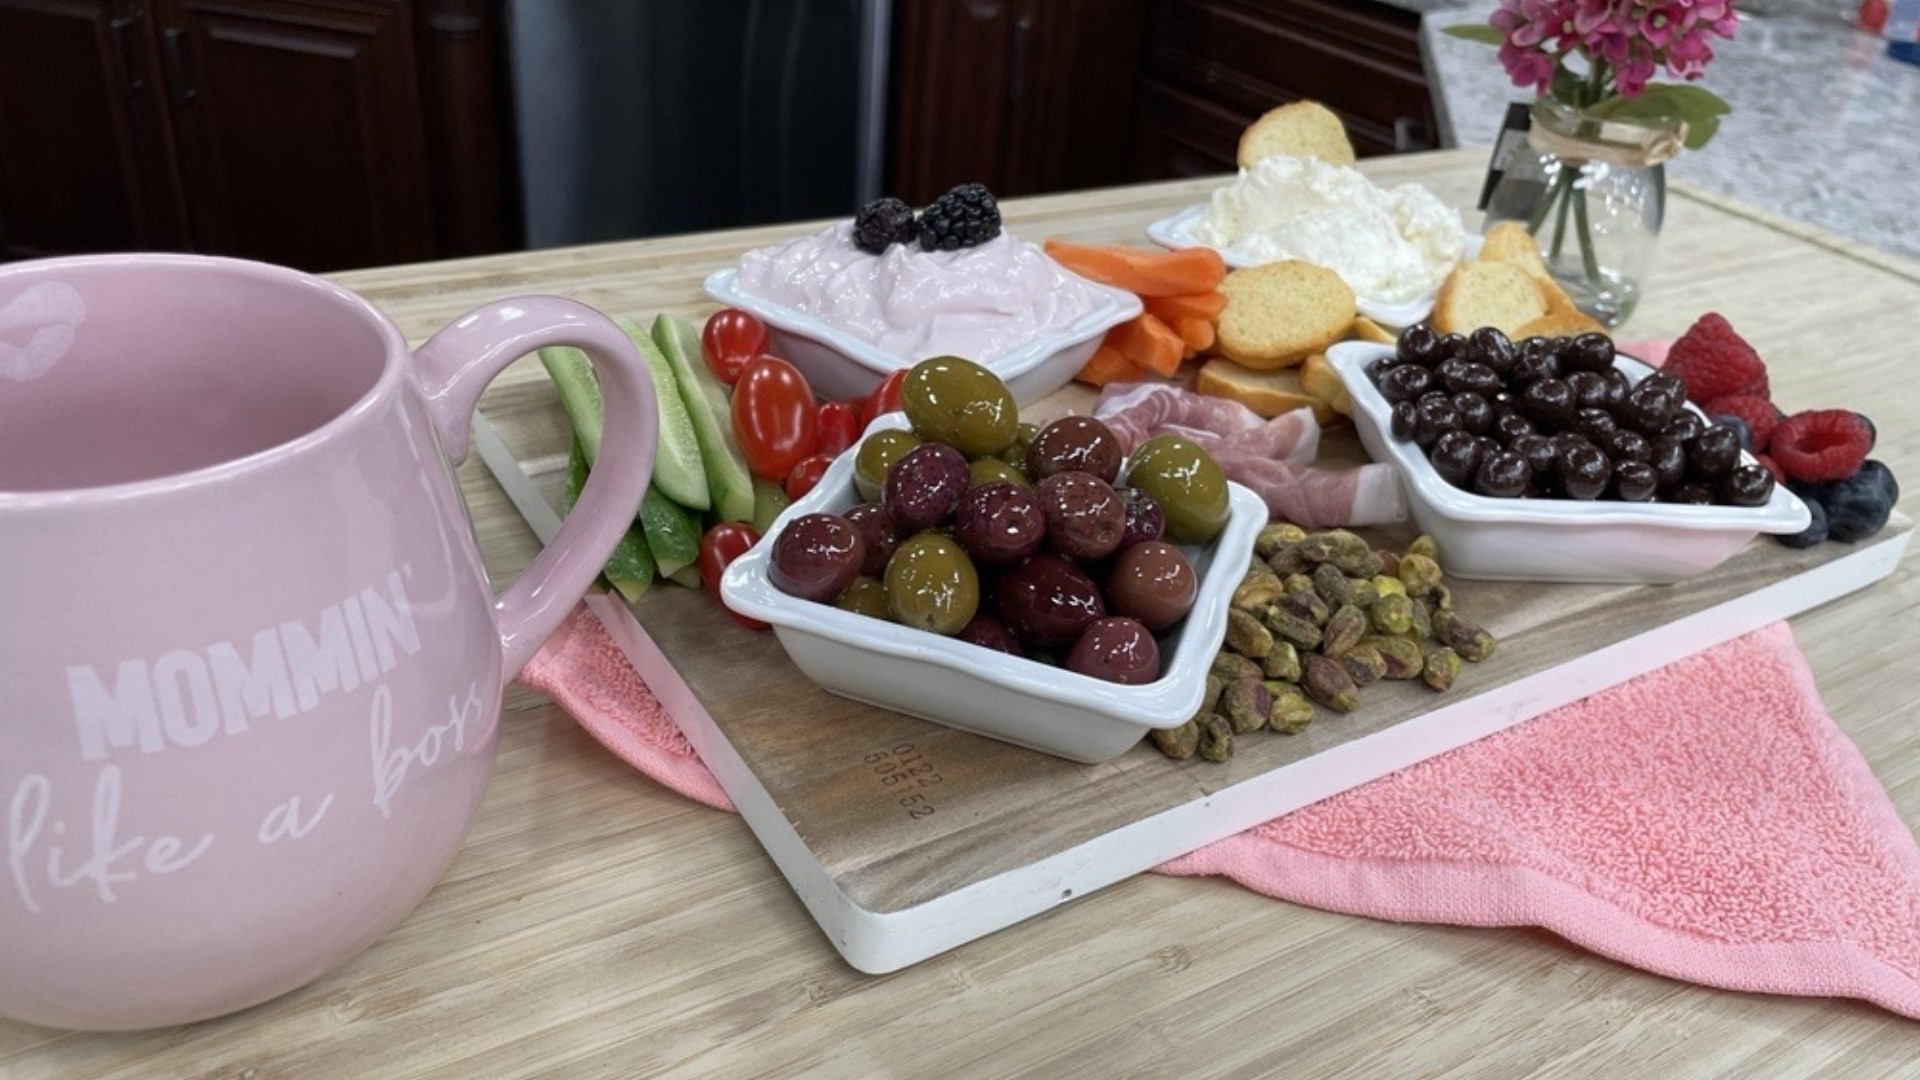 Make this year's Mother's Day extra special with a dietician-inspired brunch board that's packed with fruits, nuts and a few surprises as well!